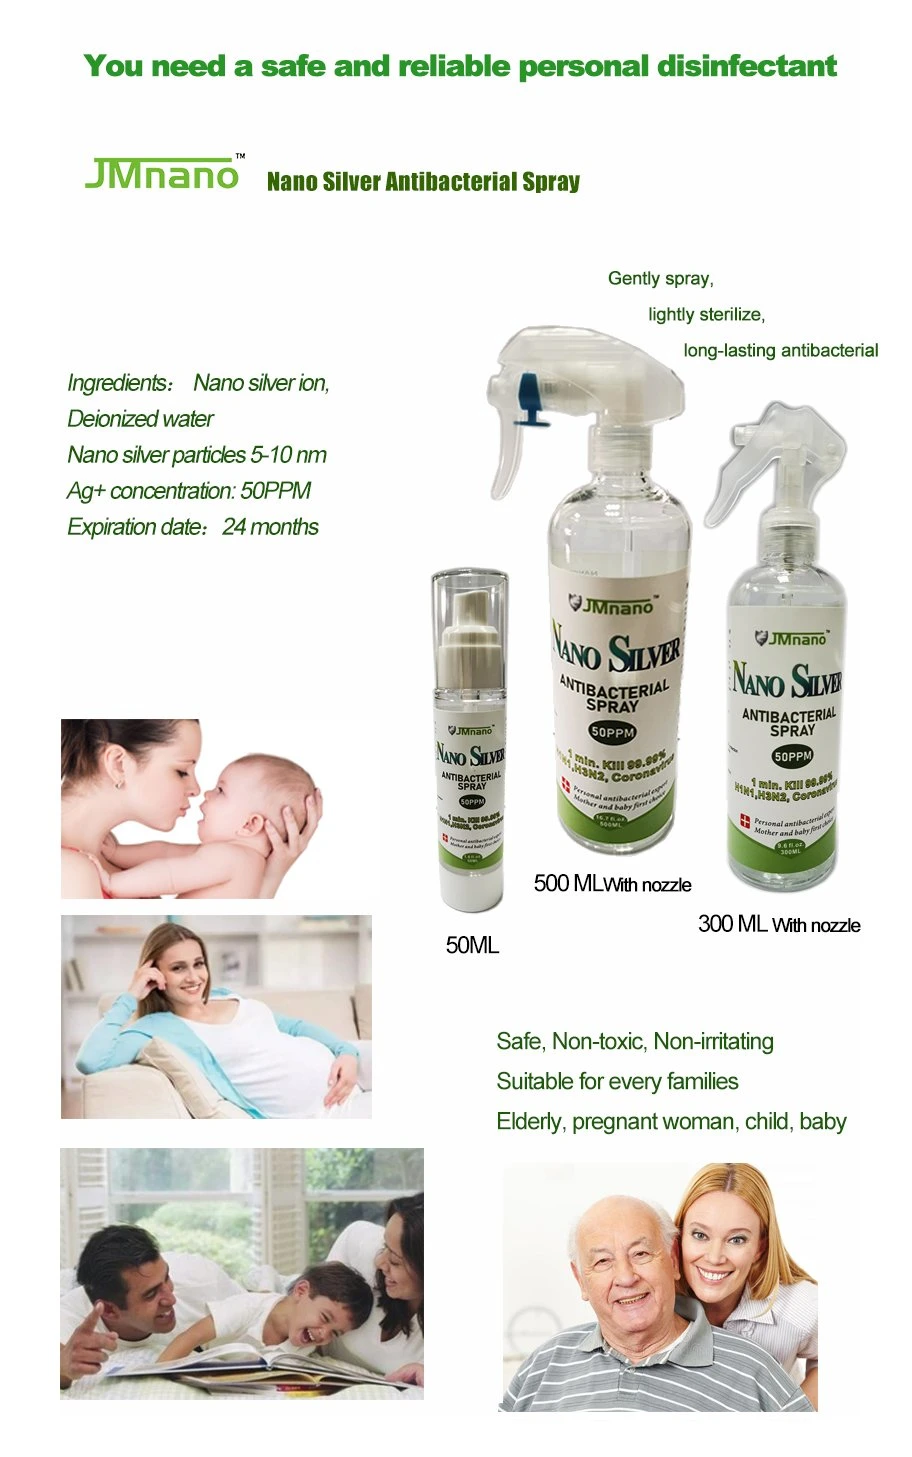 Jmnano Nano Silver Antibacterial Disinfectant Products Manufacturer